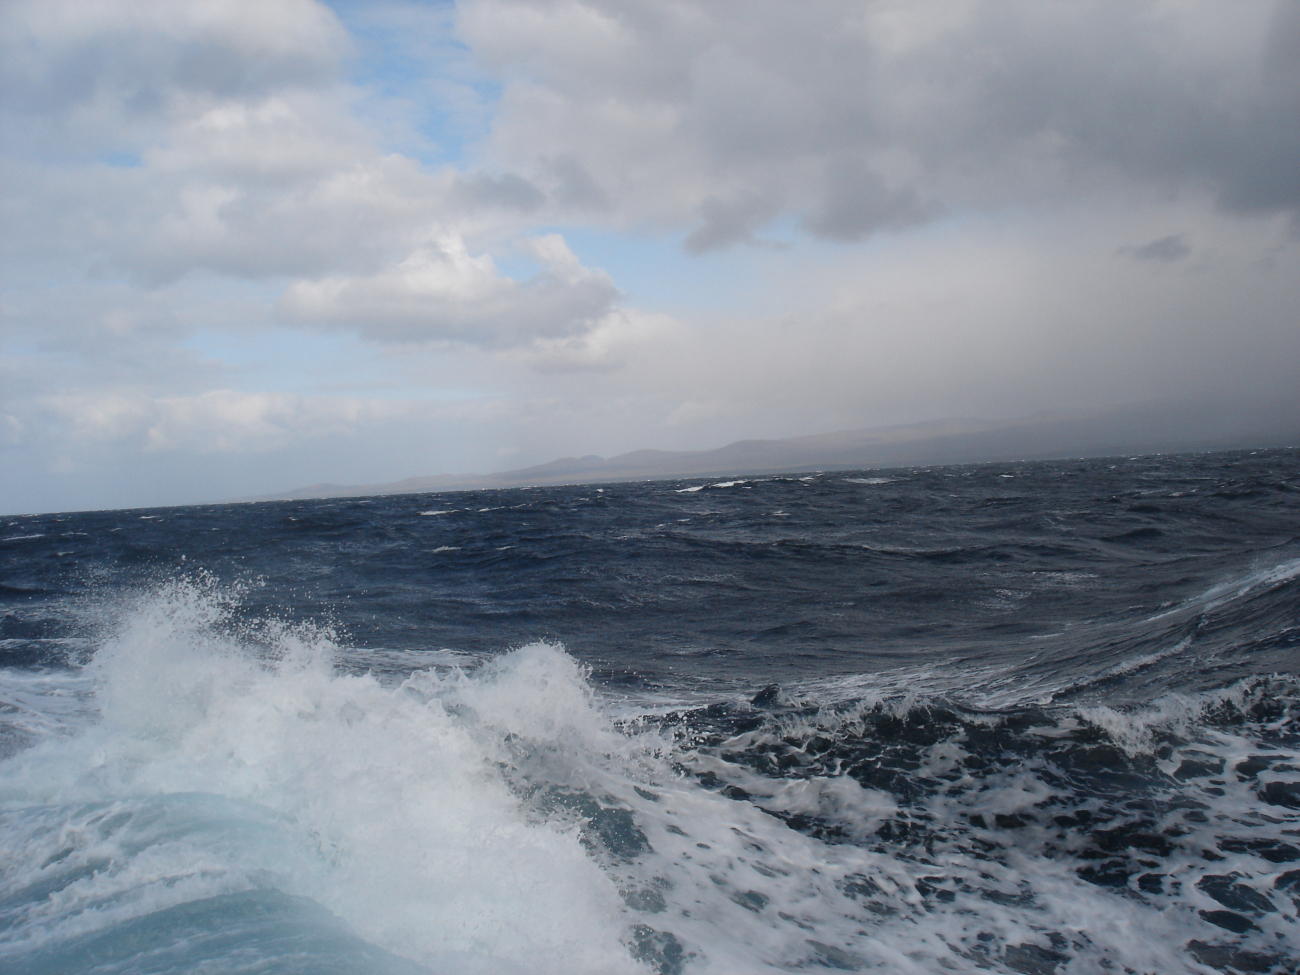 Typical day at sea in the Aleutian Islands